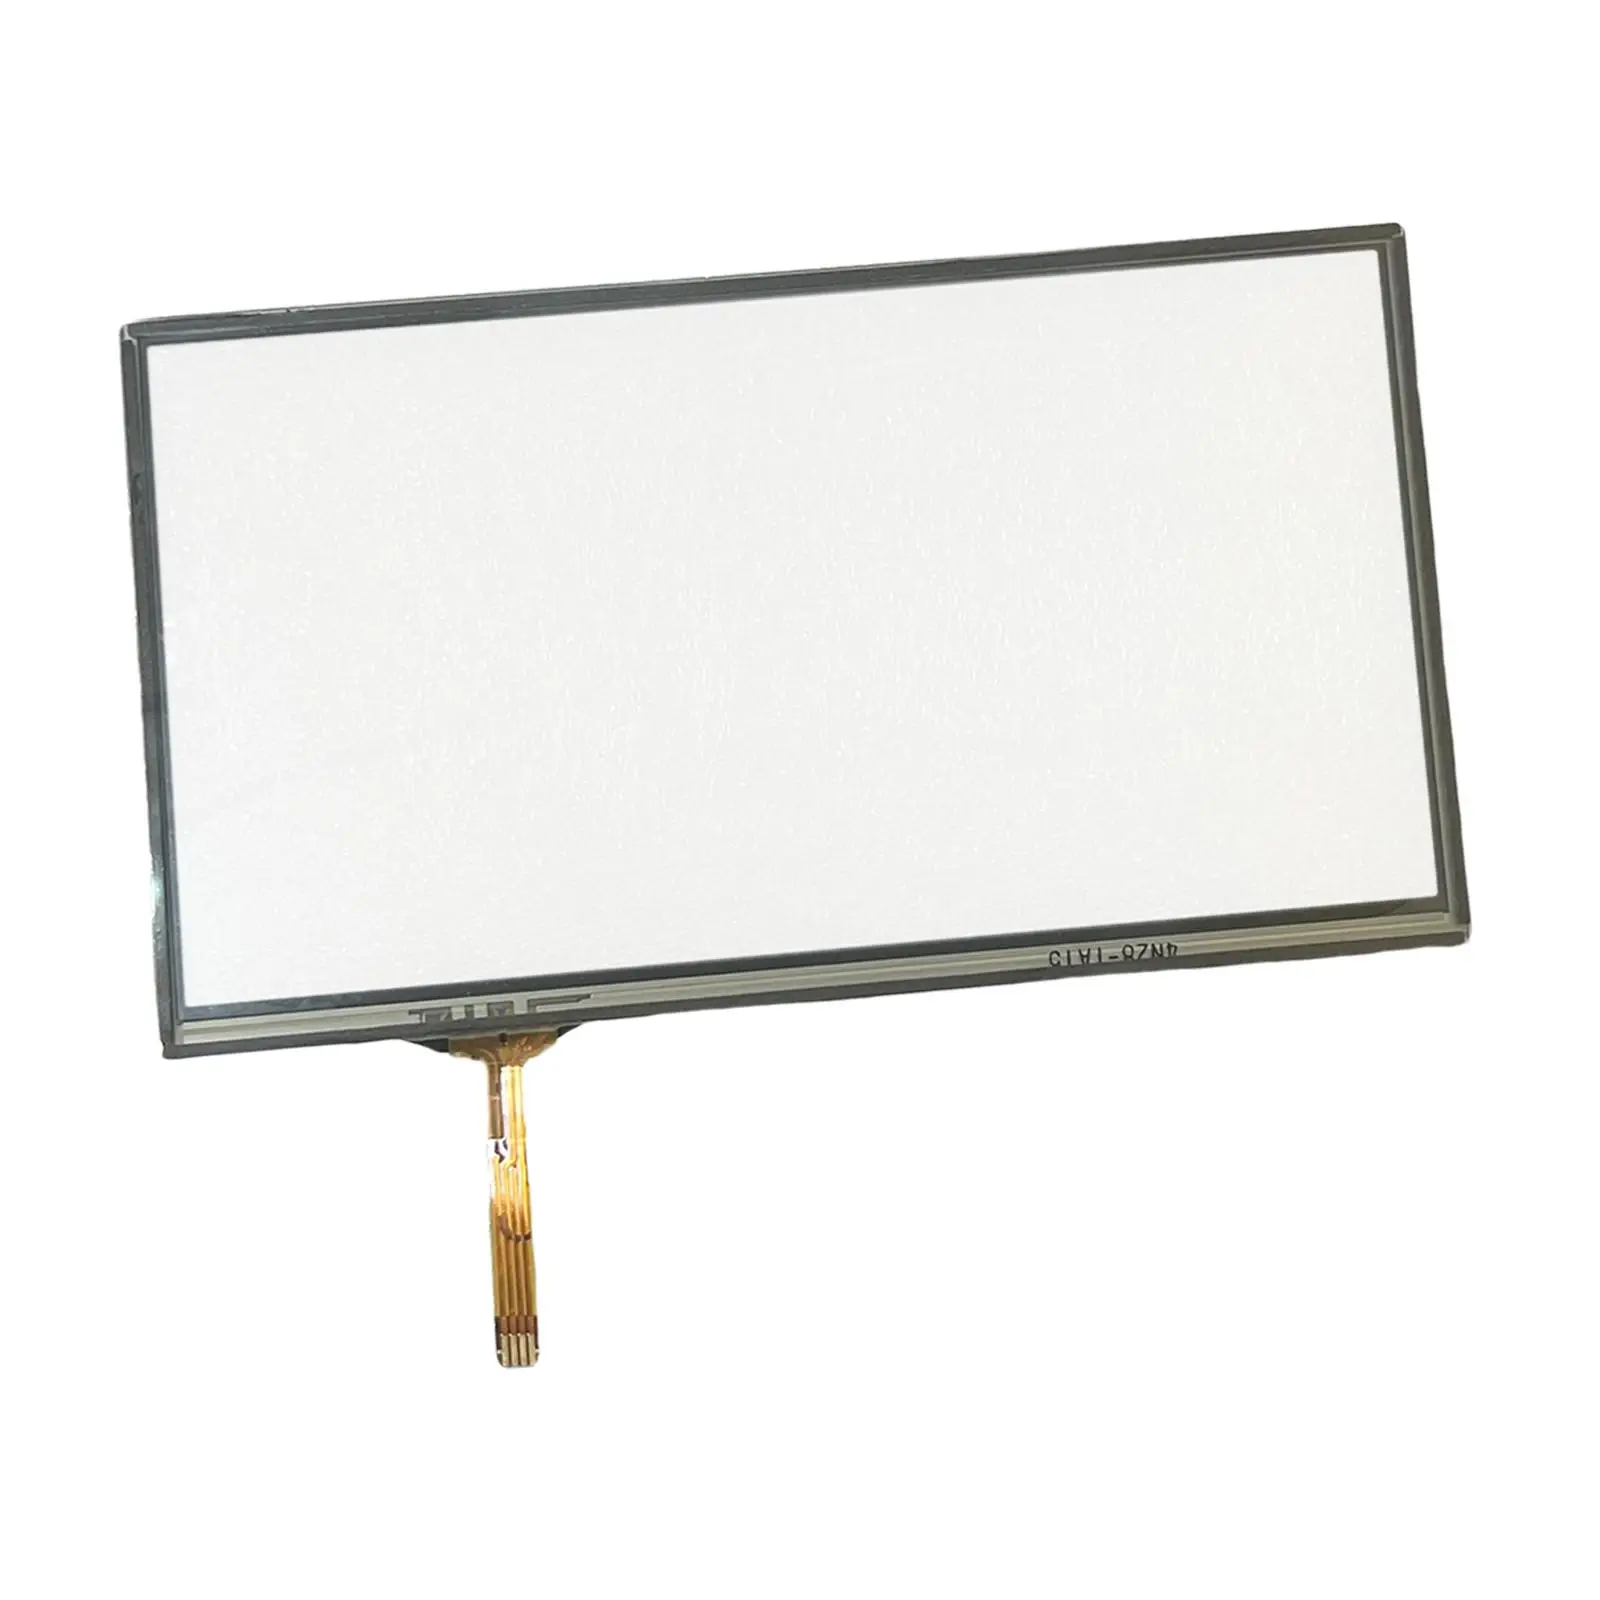 7Inches Navigation Touch Screen Digitizer Glass Panel Fix Repair for Nissan